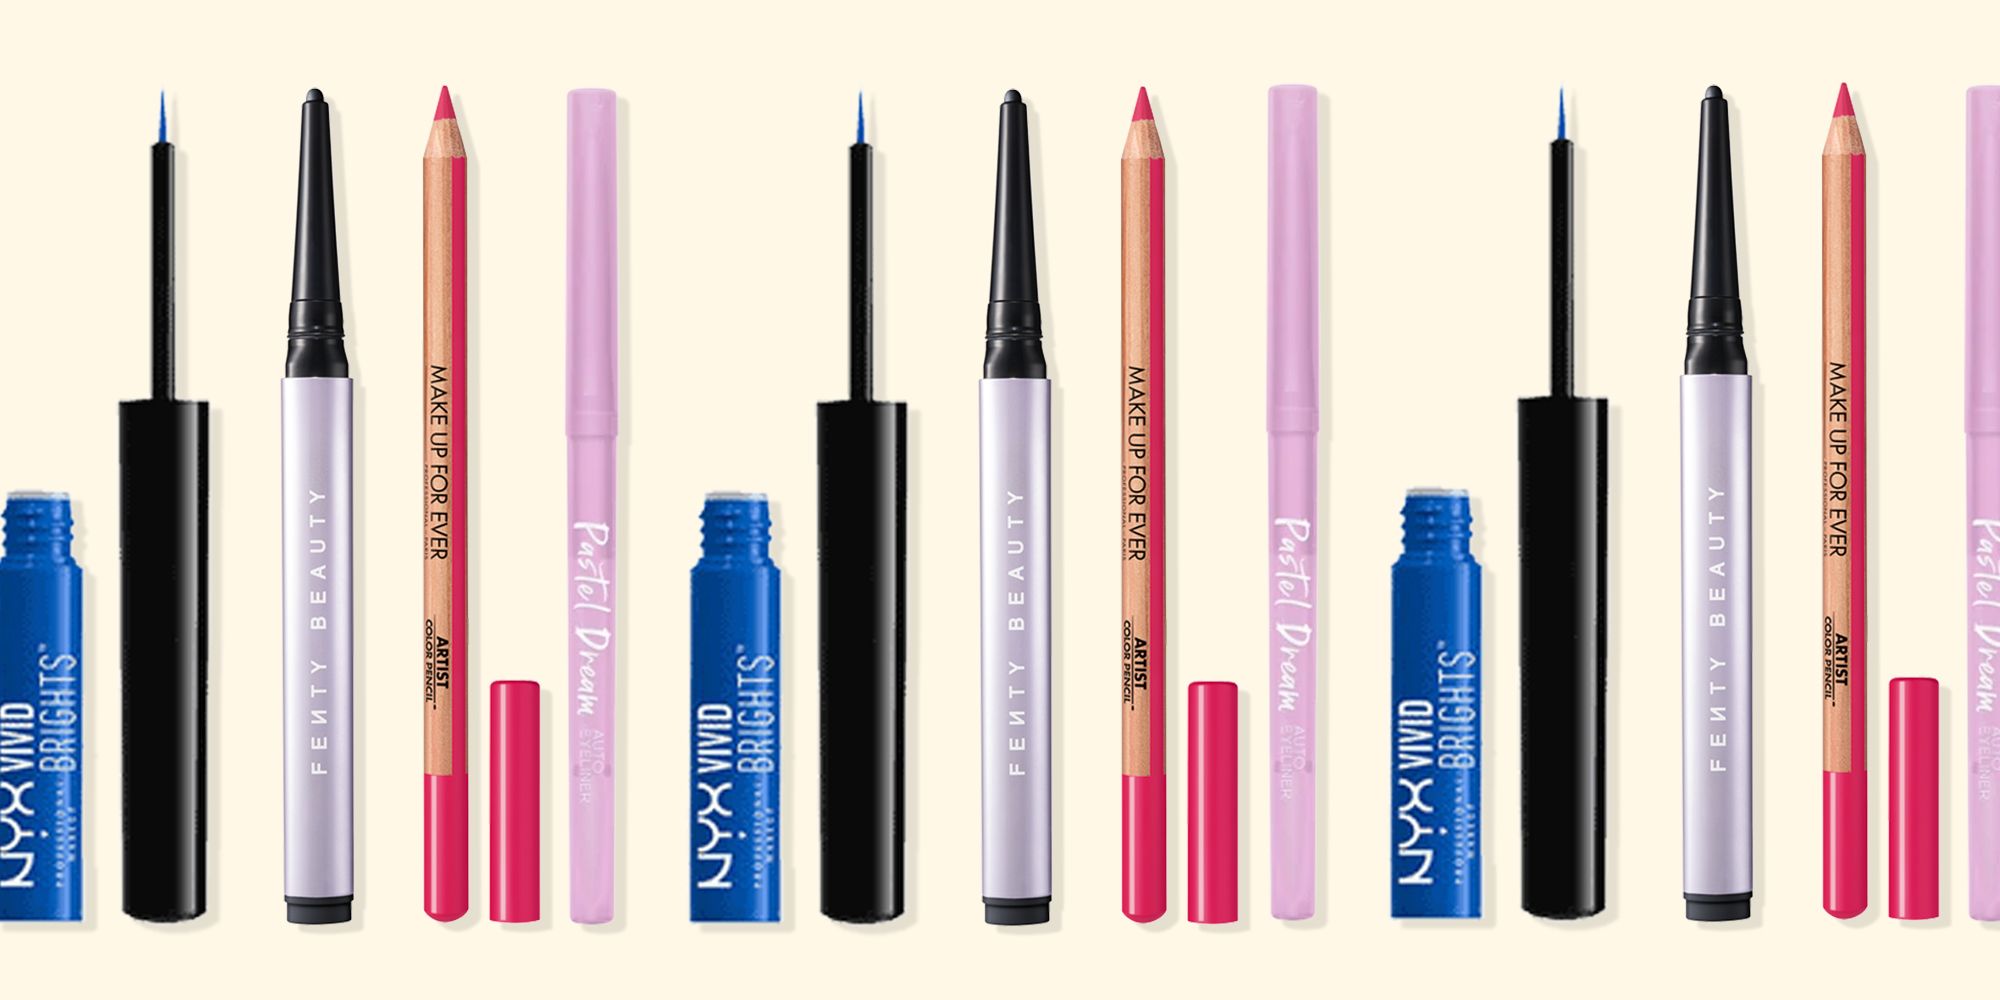 Best Colored Eyeliners 2022 - Pigmented Liquid and Liners